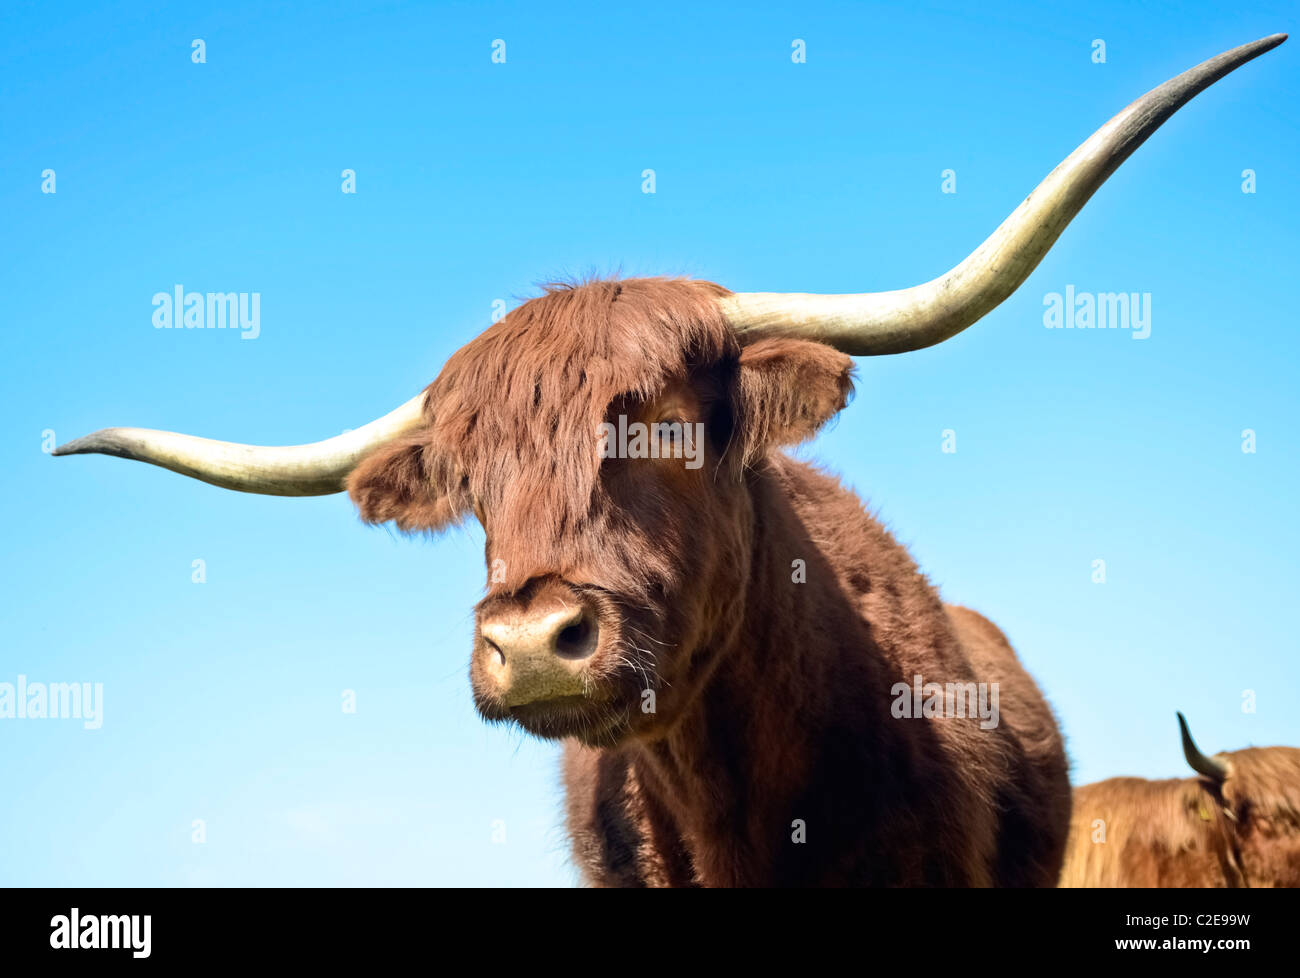 A long horned scottish highland cow Stock Photo